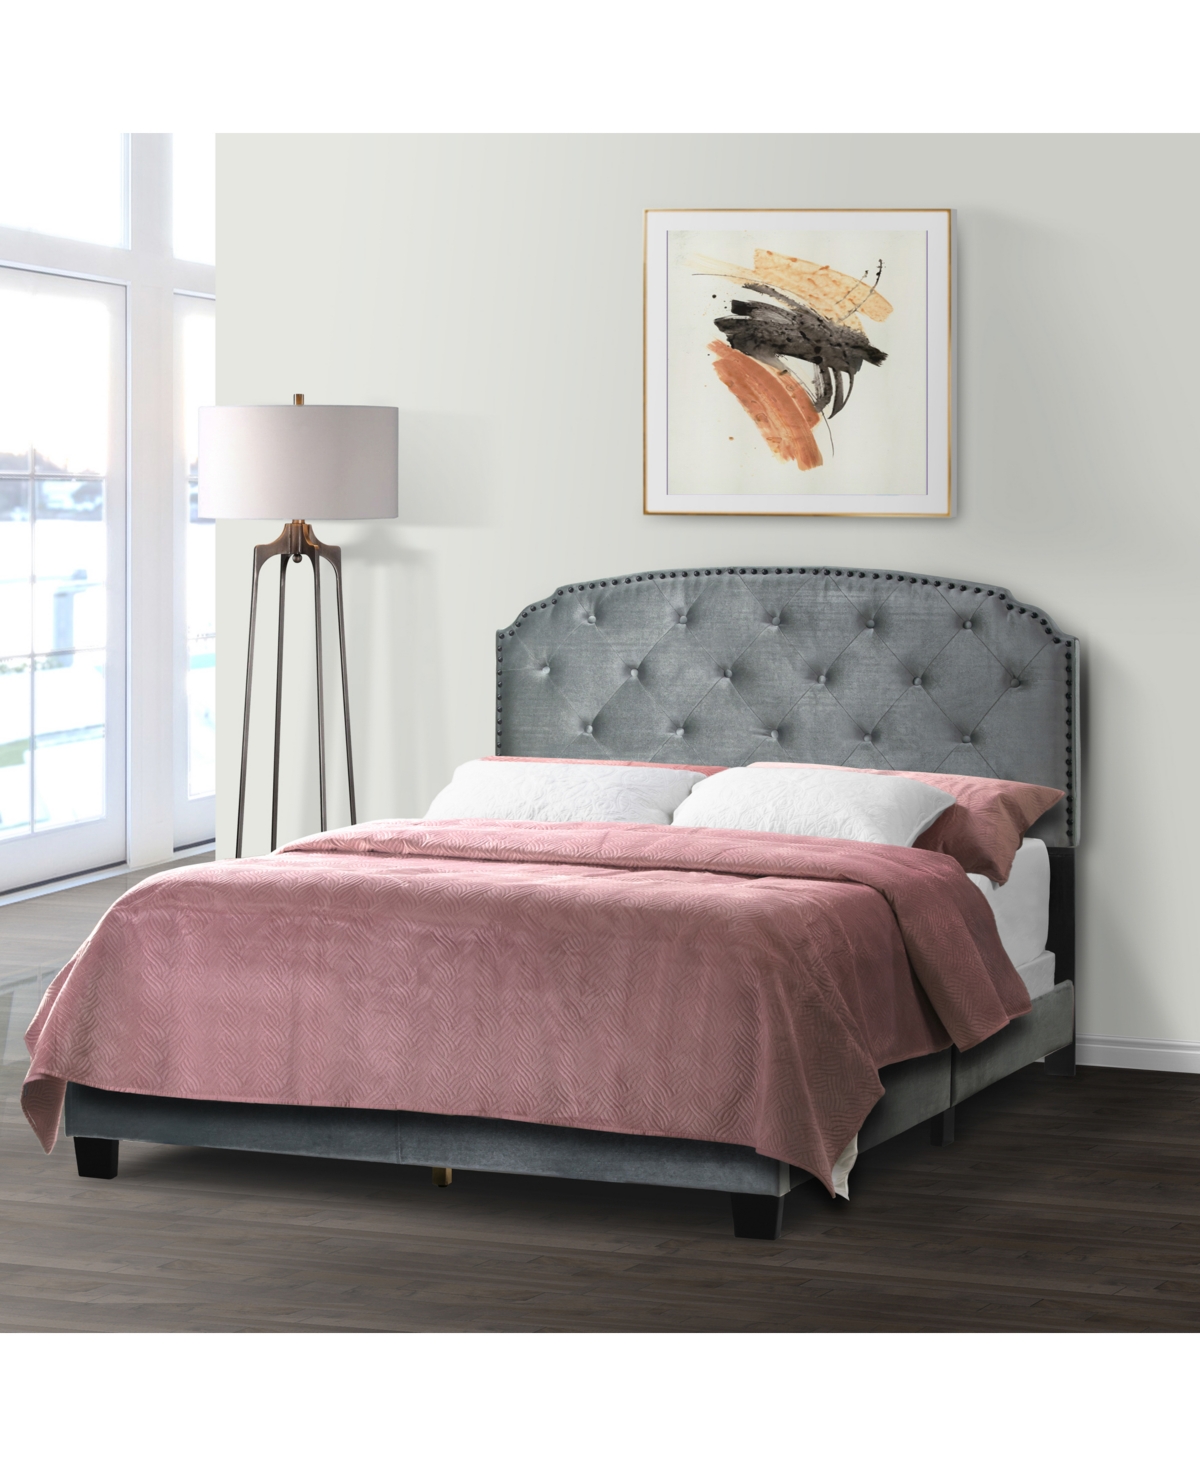 Shop Glamour Home 51.75" Arin Fabric, Rubberwood Queen Bed In Grey